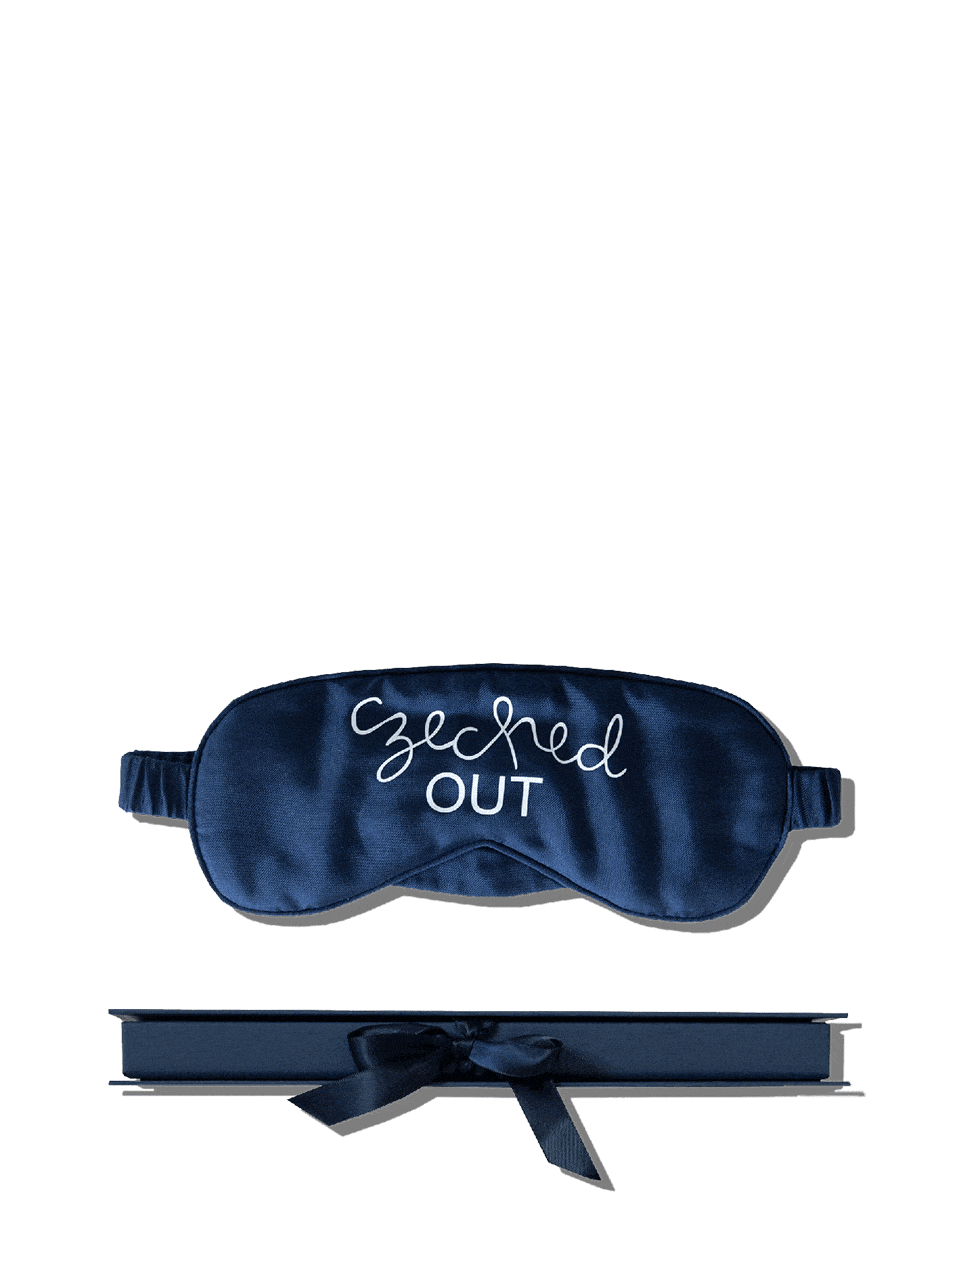 The Limited-Edition 'Czeched Out' Sleep Mask Lifestyle Joanna Czech Skincare 